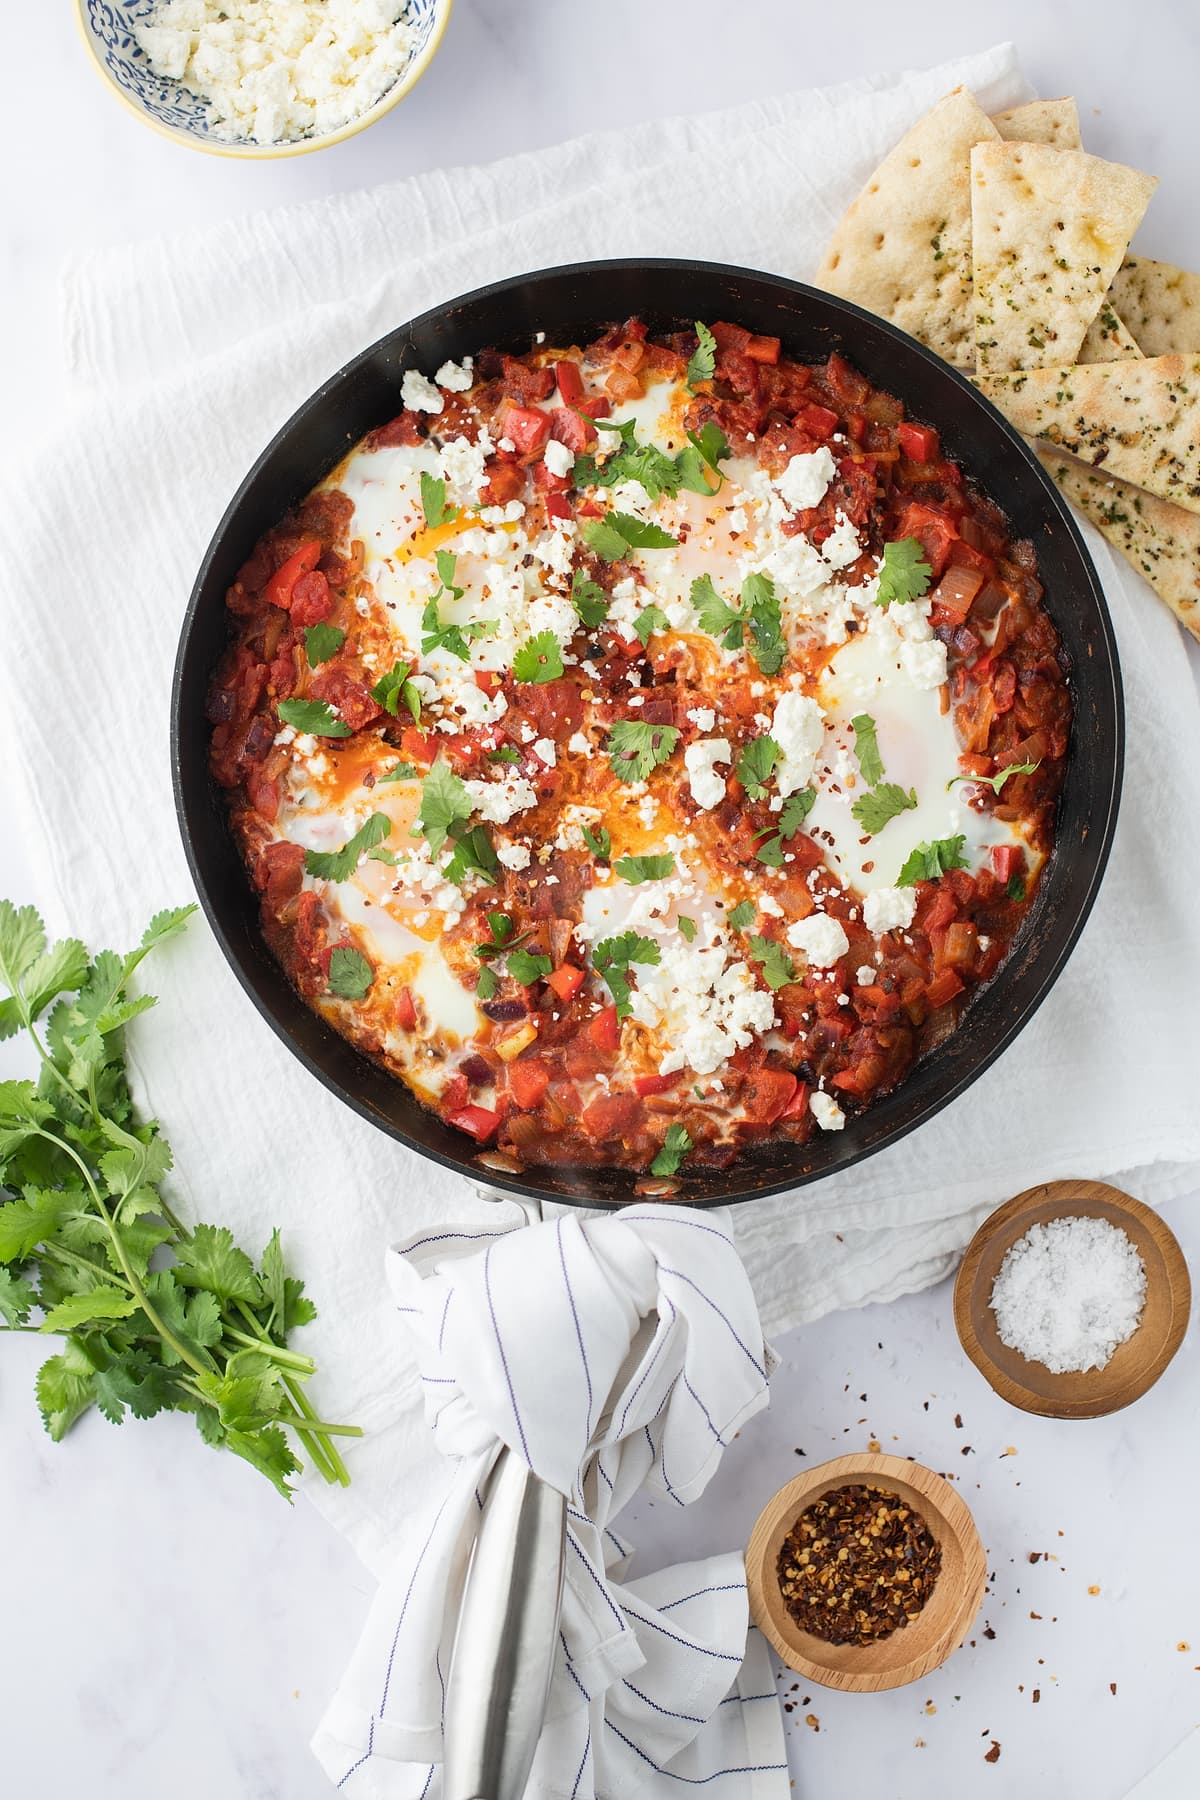 Eggs Baked in Spiced Tomato Sauce with Feta Cheese - Shakshuka